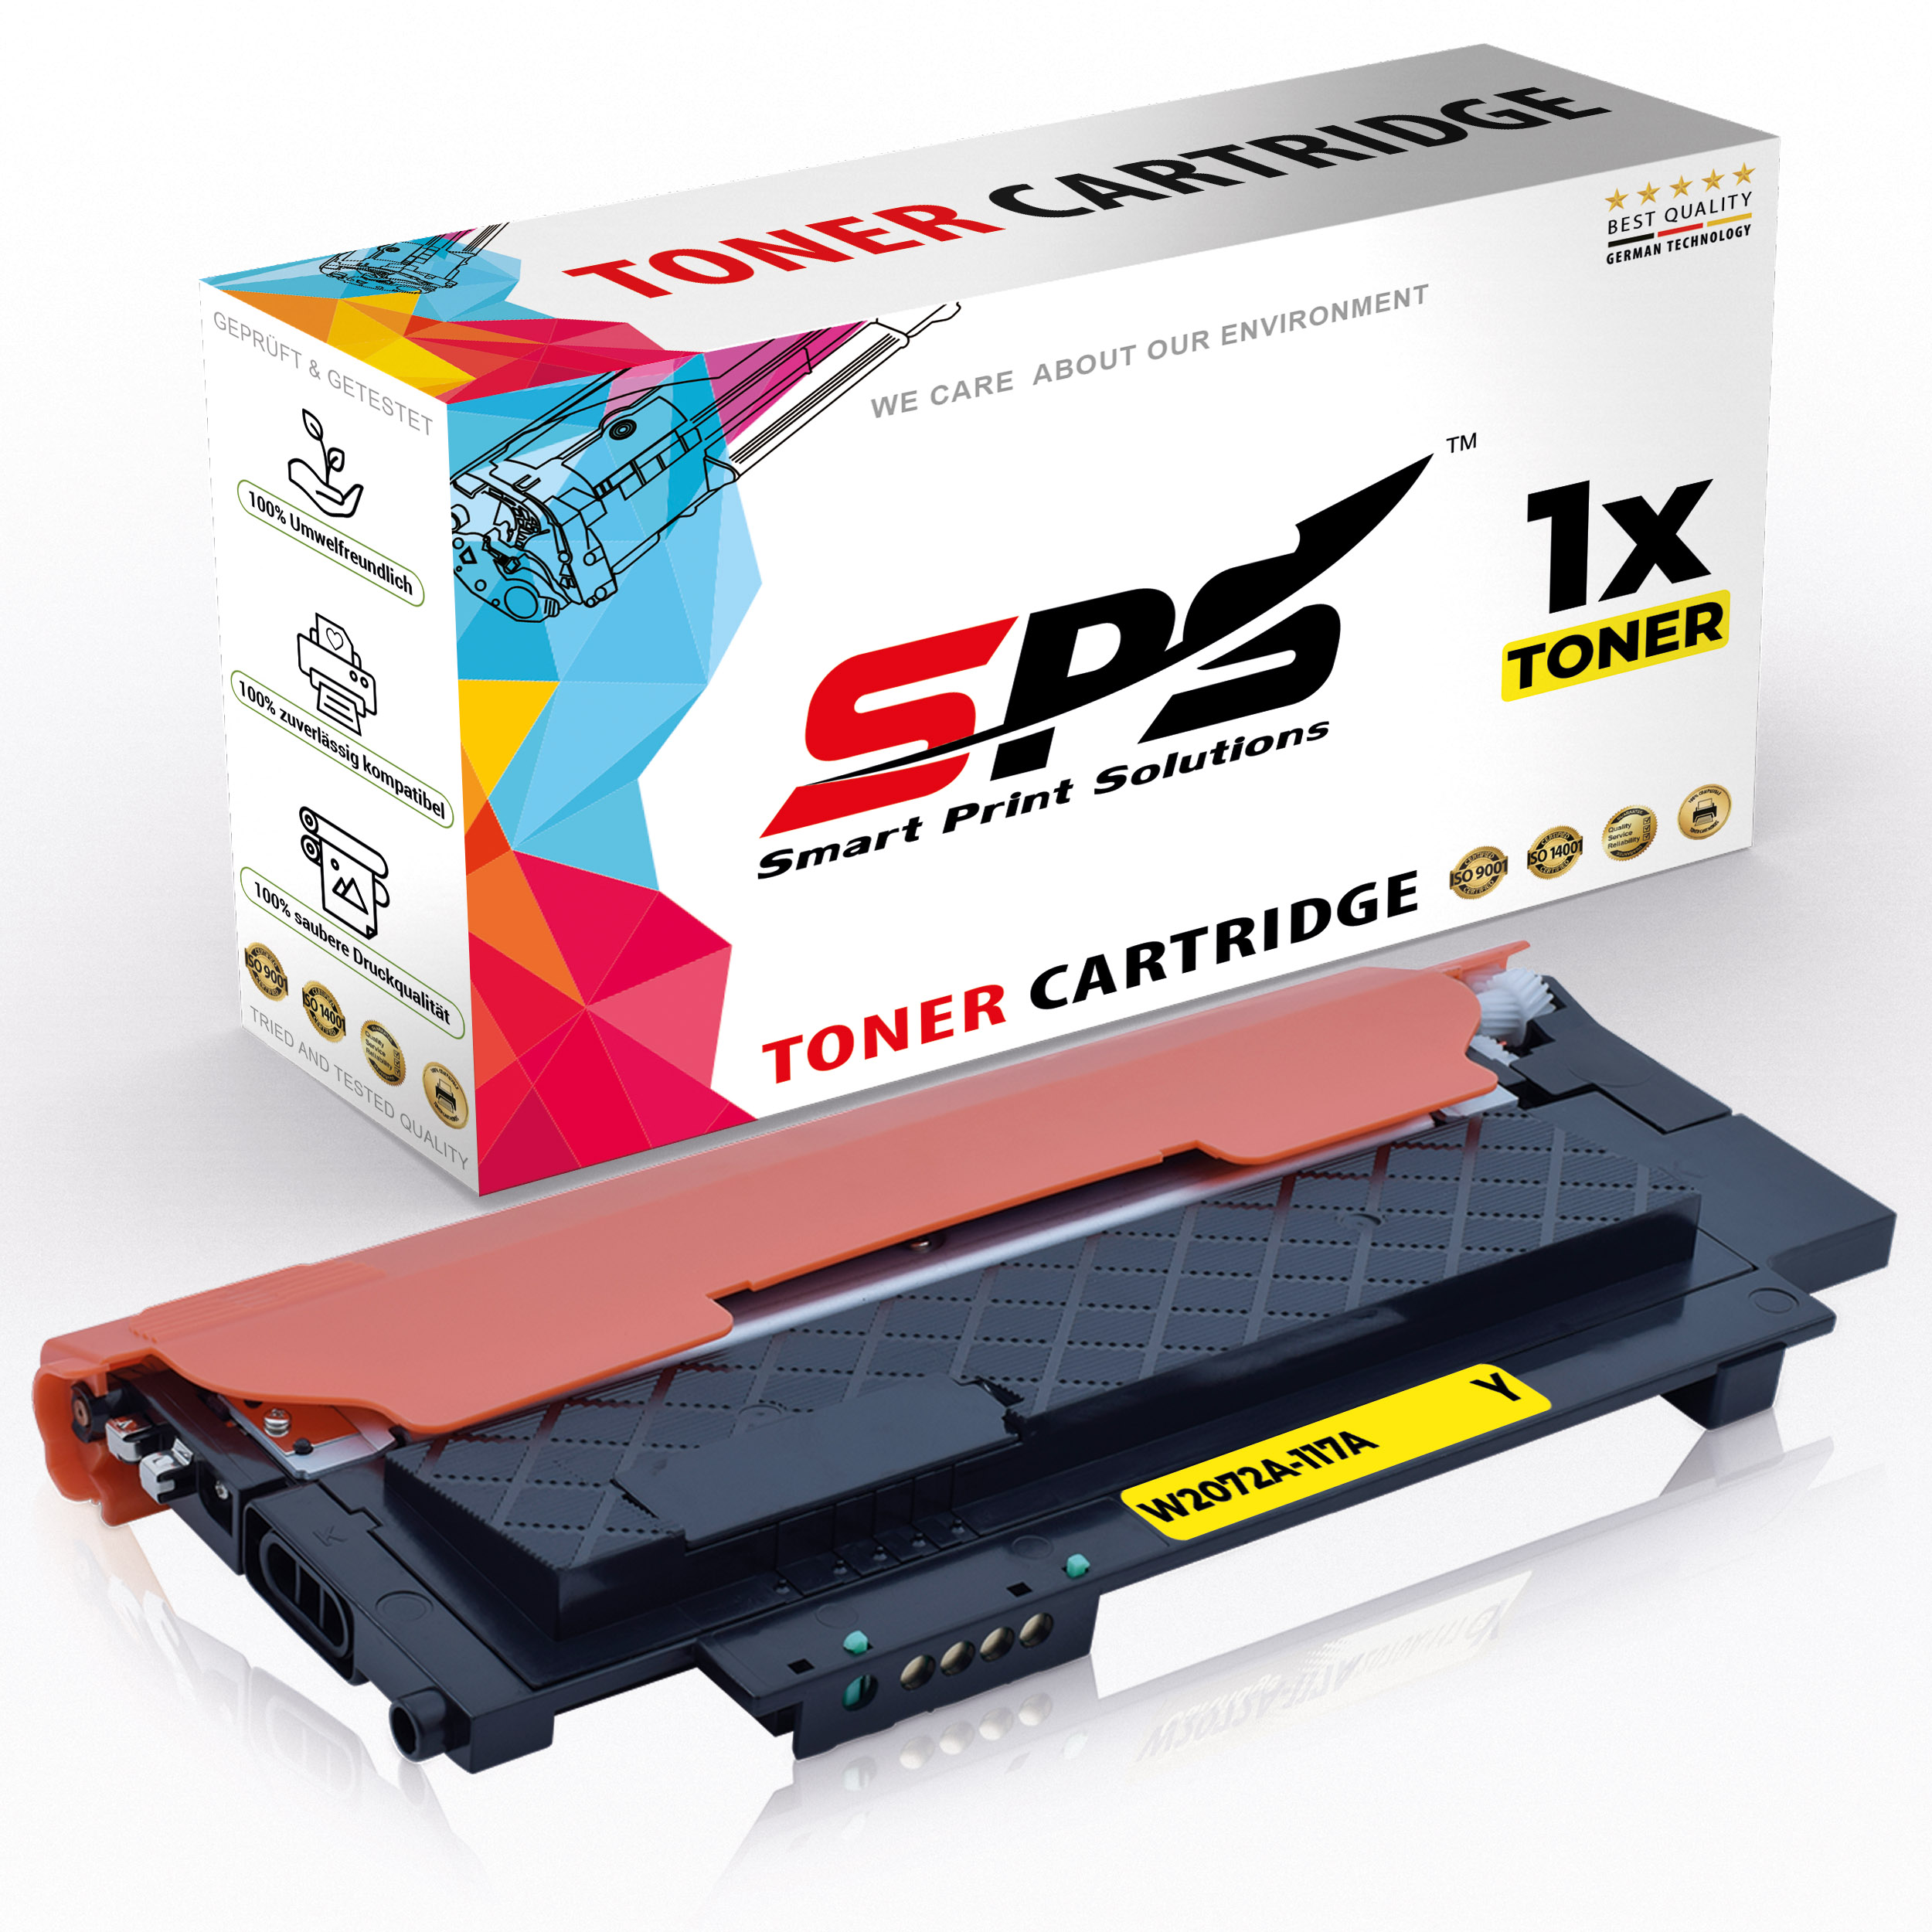 SPS S-16936 Toner / MFP W2072A Gelb Color 178NW) (117A Laser